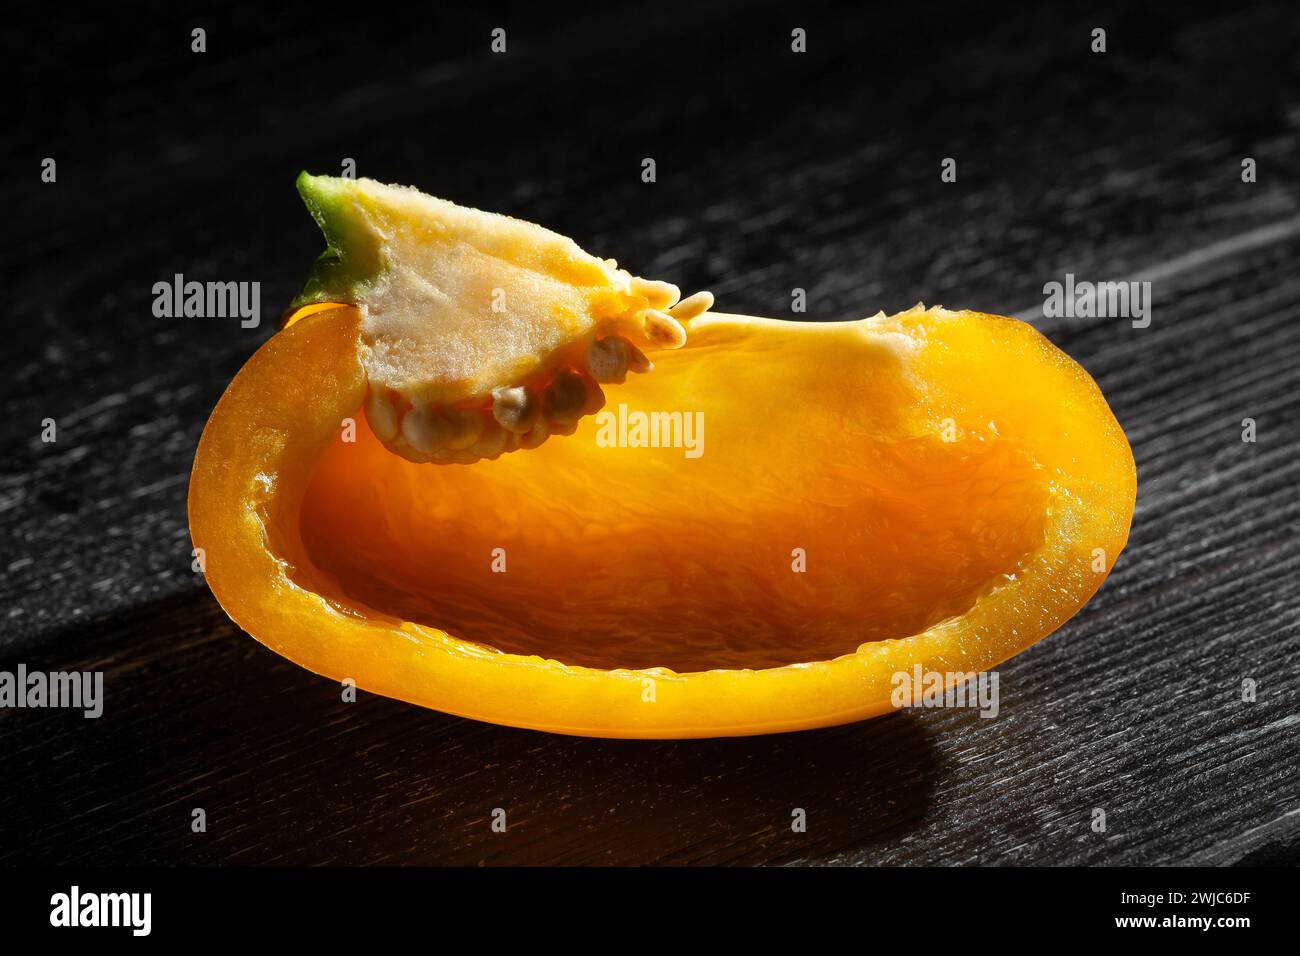 sliced yellow bell pepper on black wood background Stock Photo